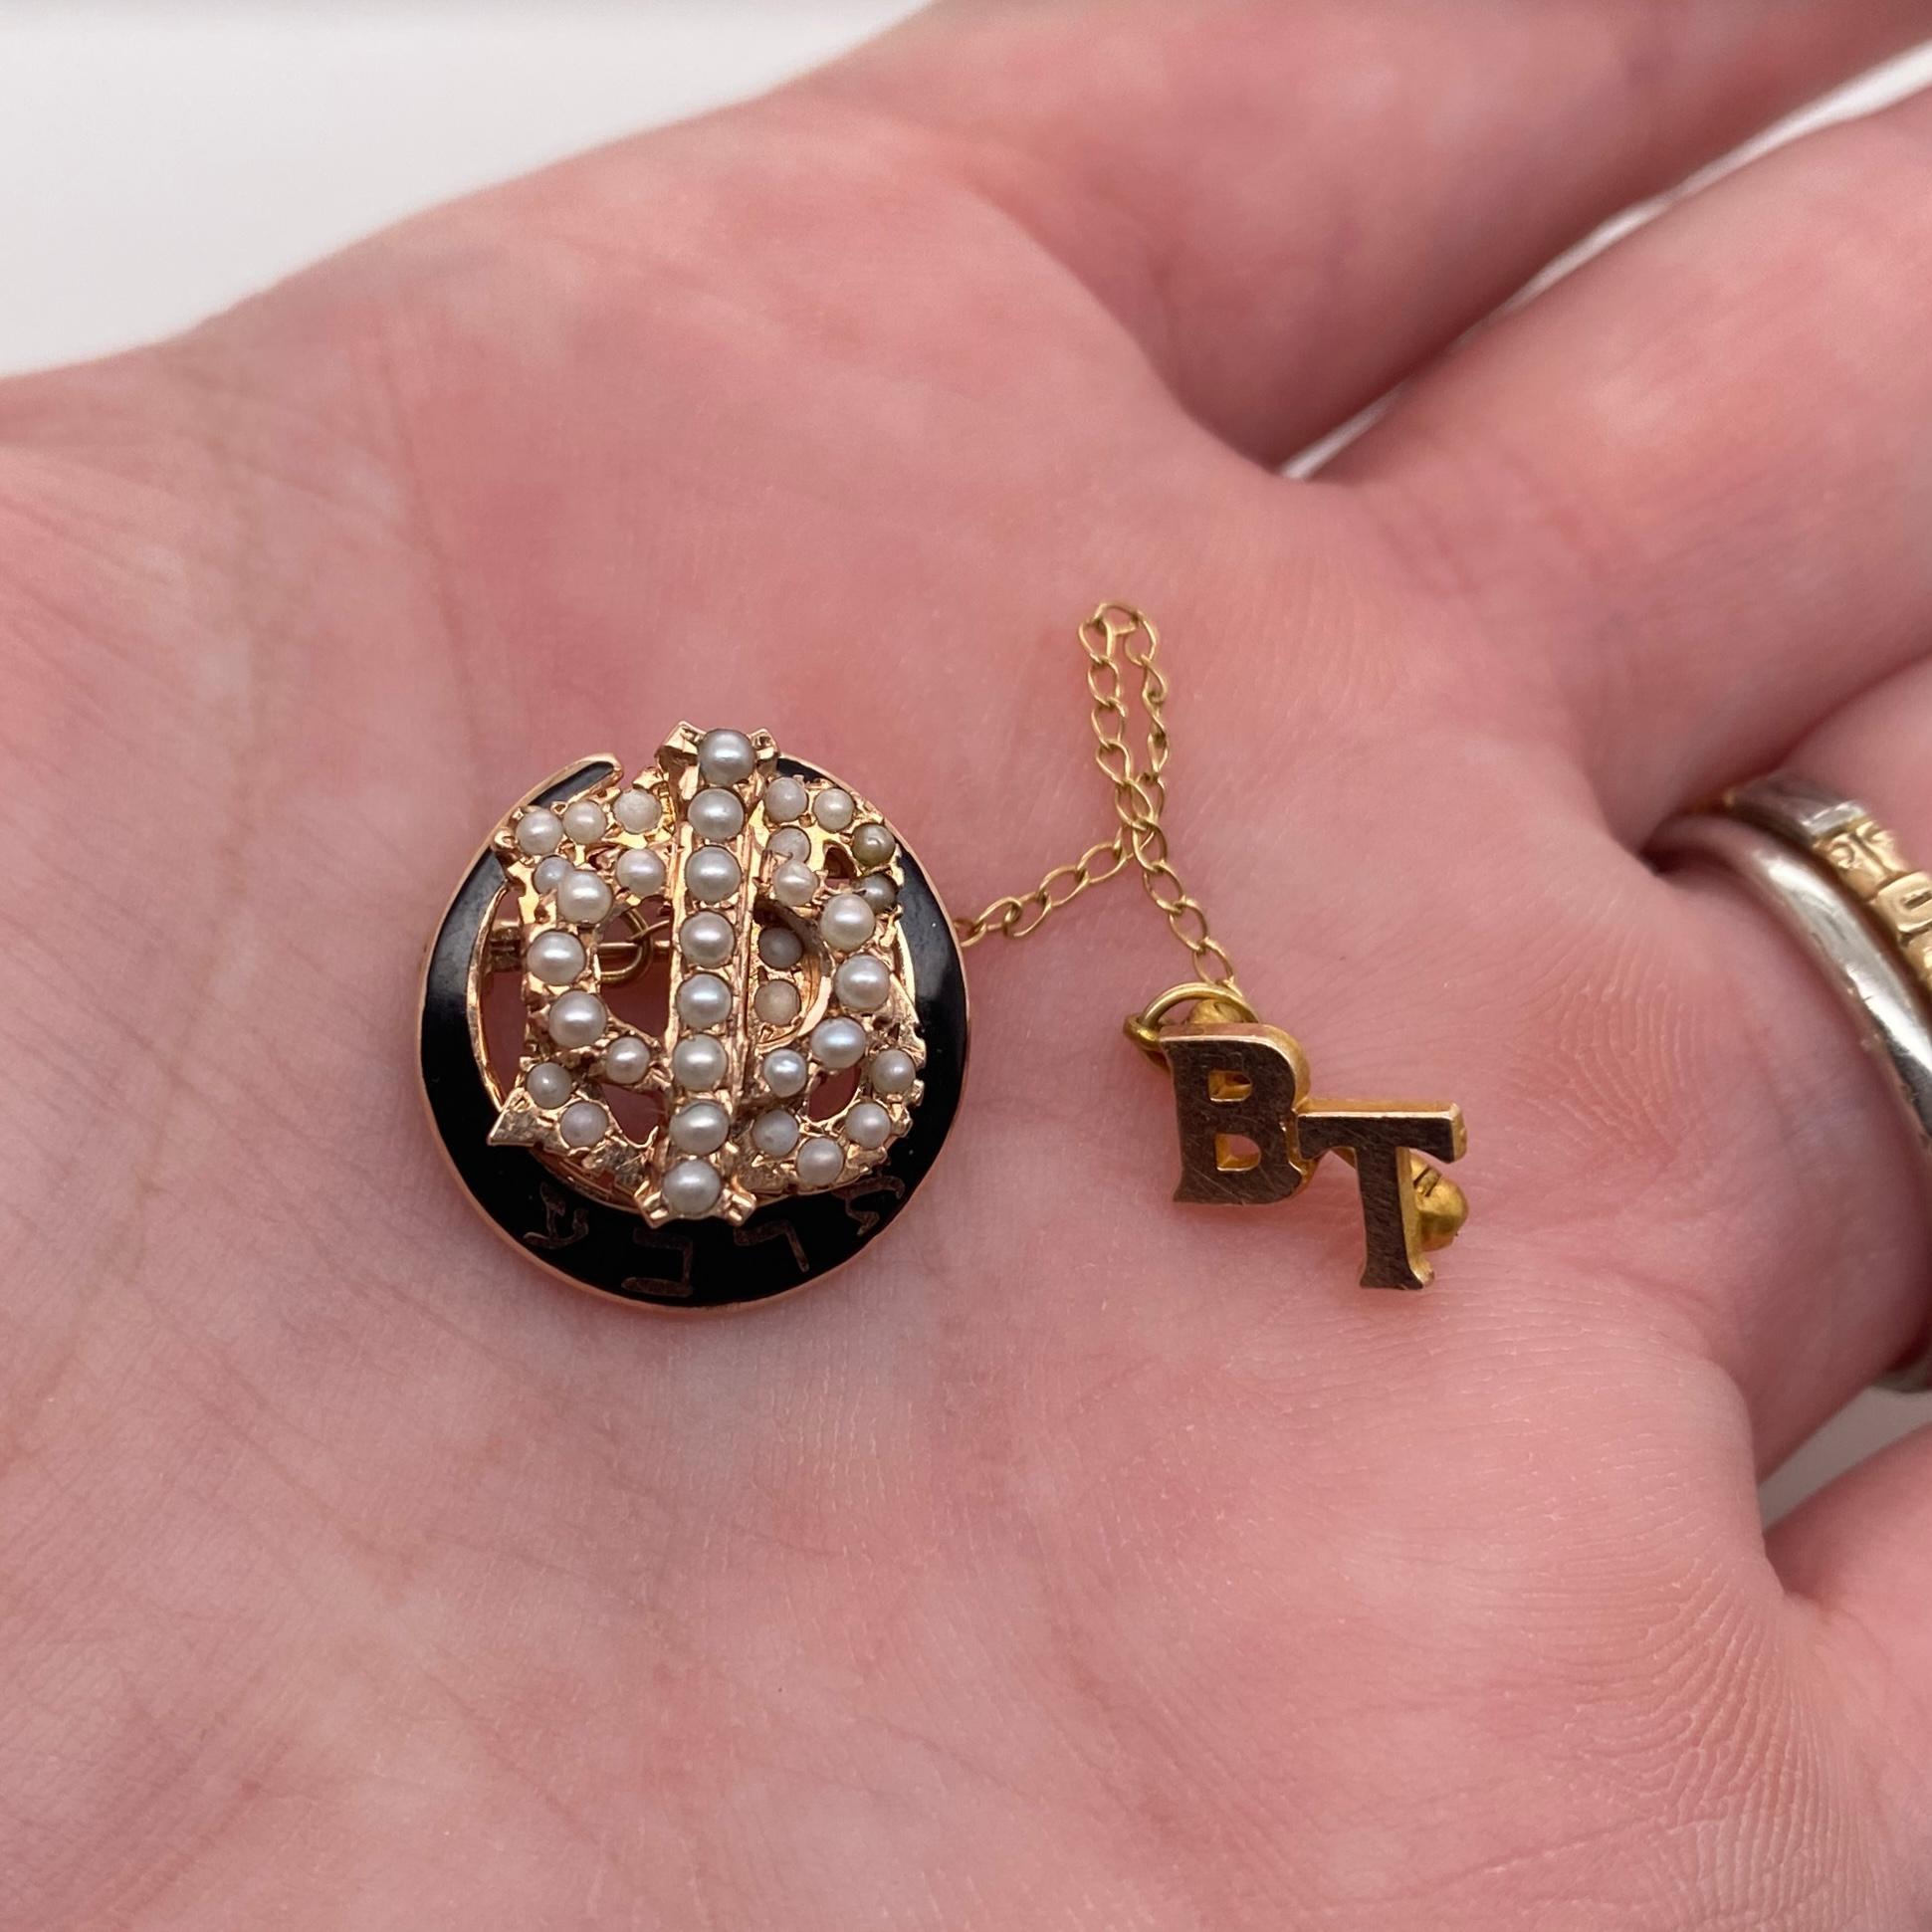 This Gamma Phi Beta brooch / pin is an estate piece with a beautiful history. The Gamma Phi Beta sorority was originally founded in Syracuse University in 1874. The term 